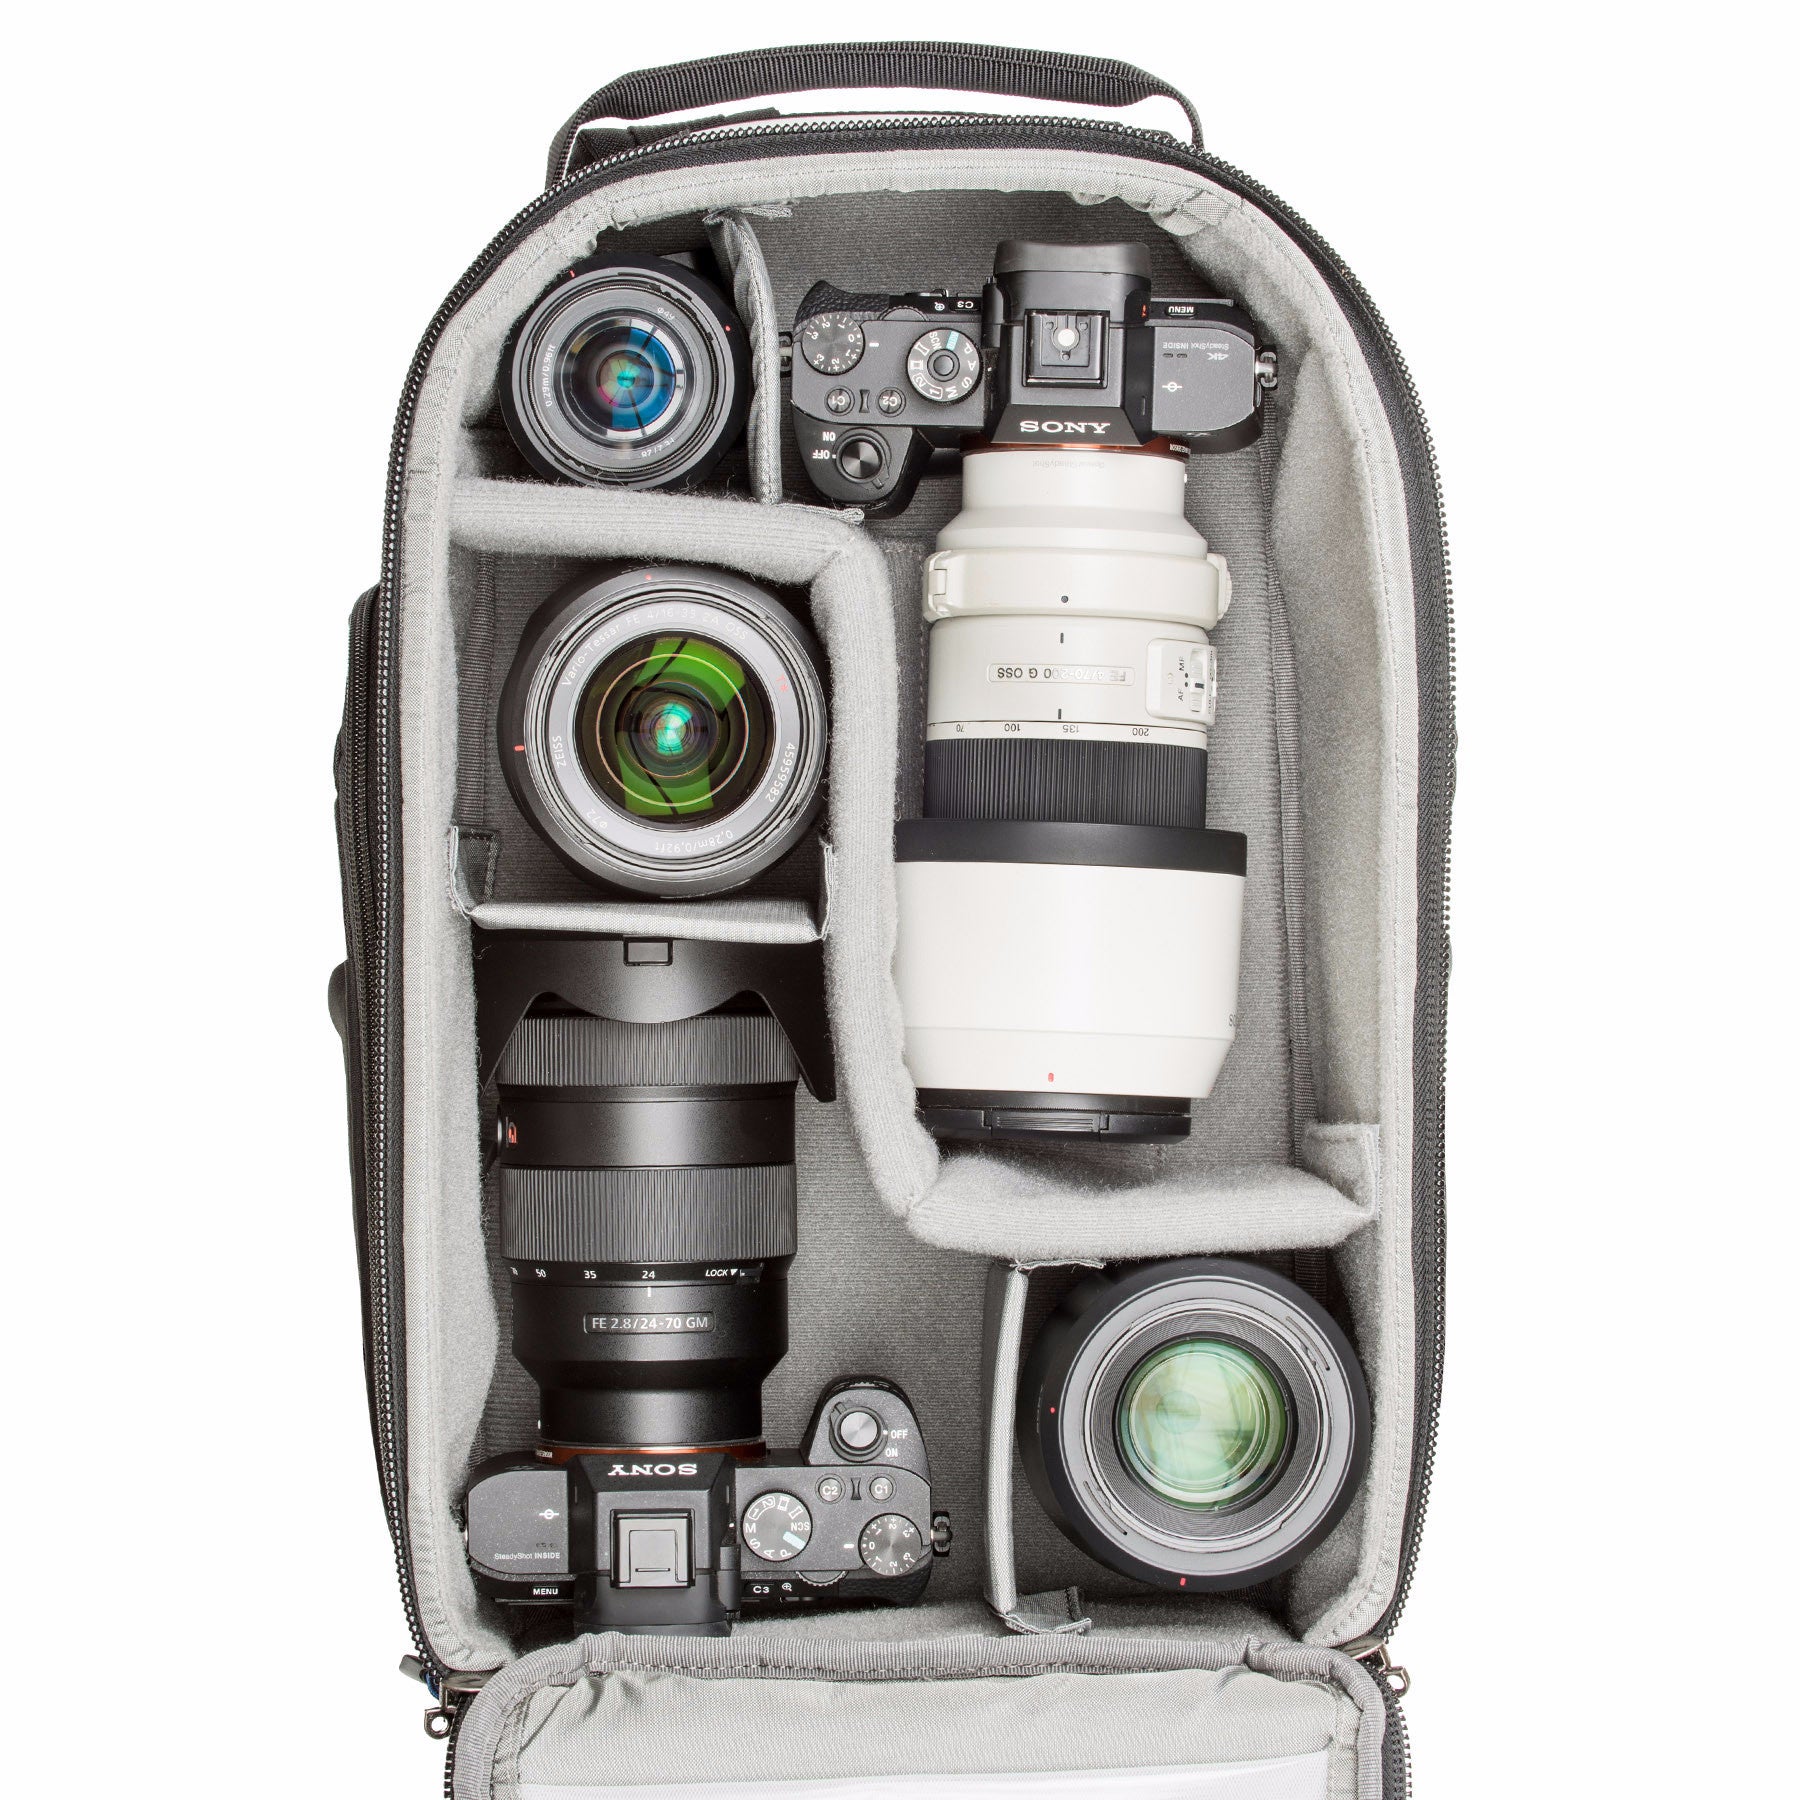 StreetWalker backpacks are designed to accommodate standard DSLR bodies with lenses attached